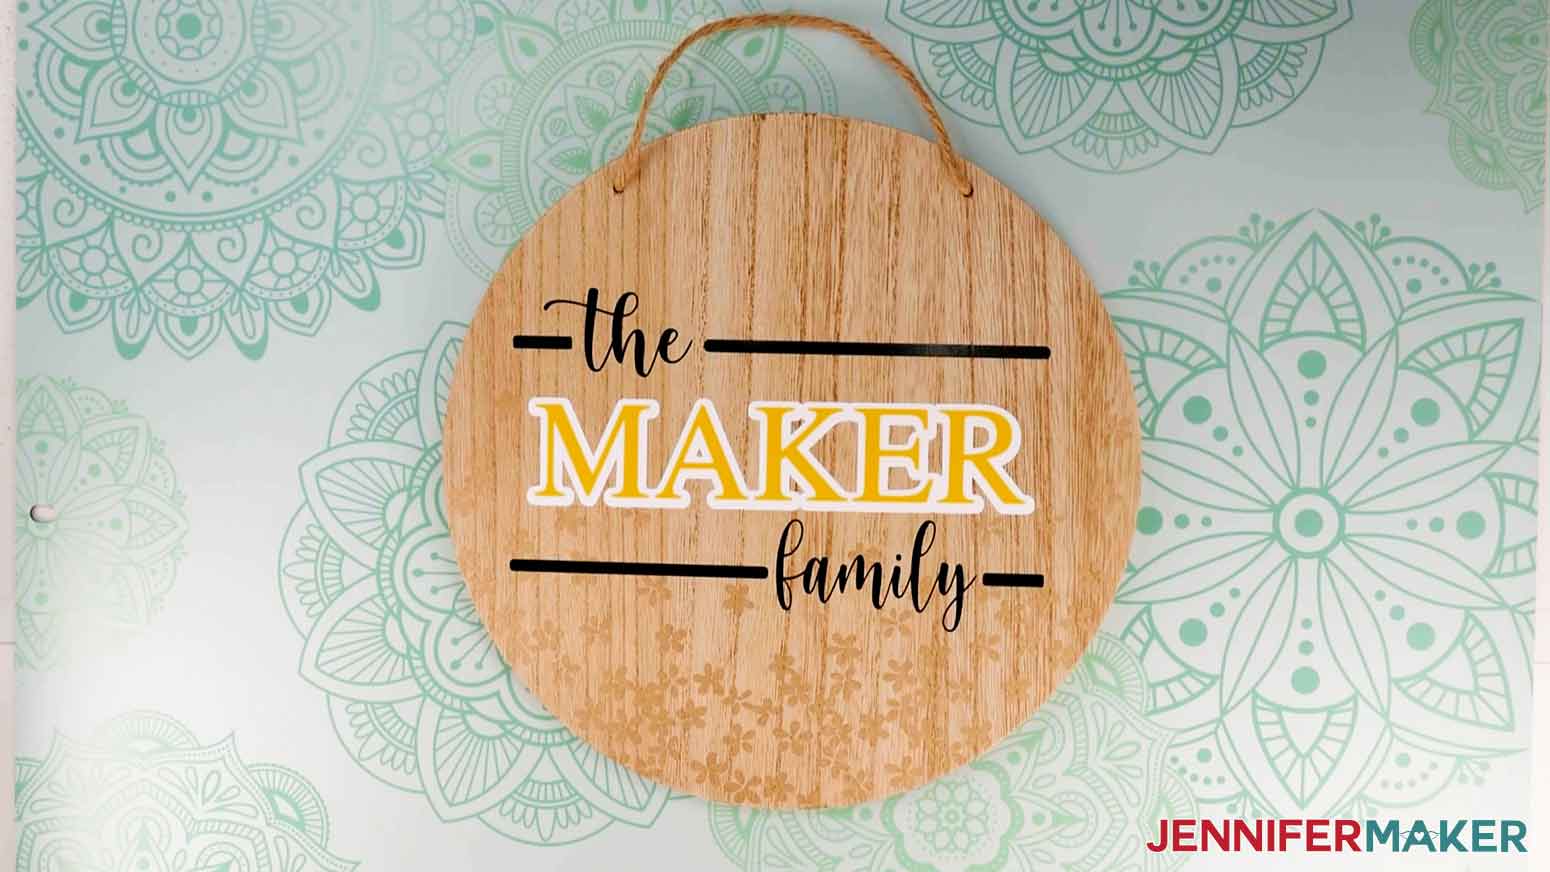 Personalized family design on double-sided sign.